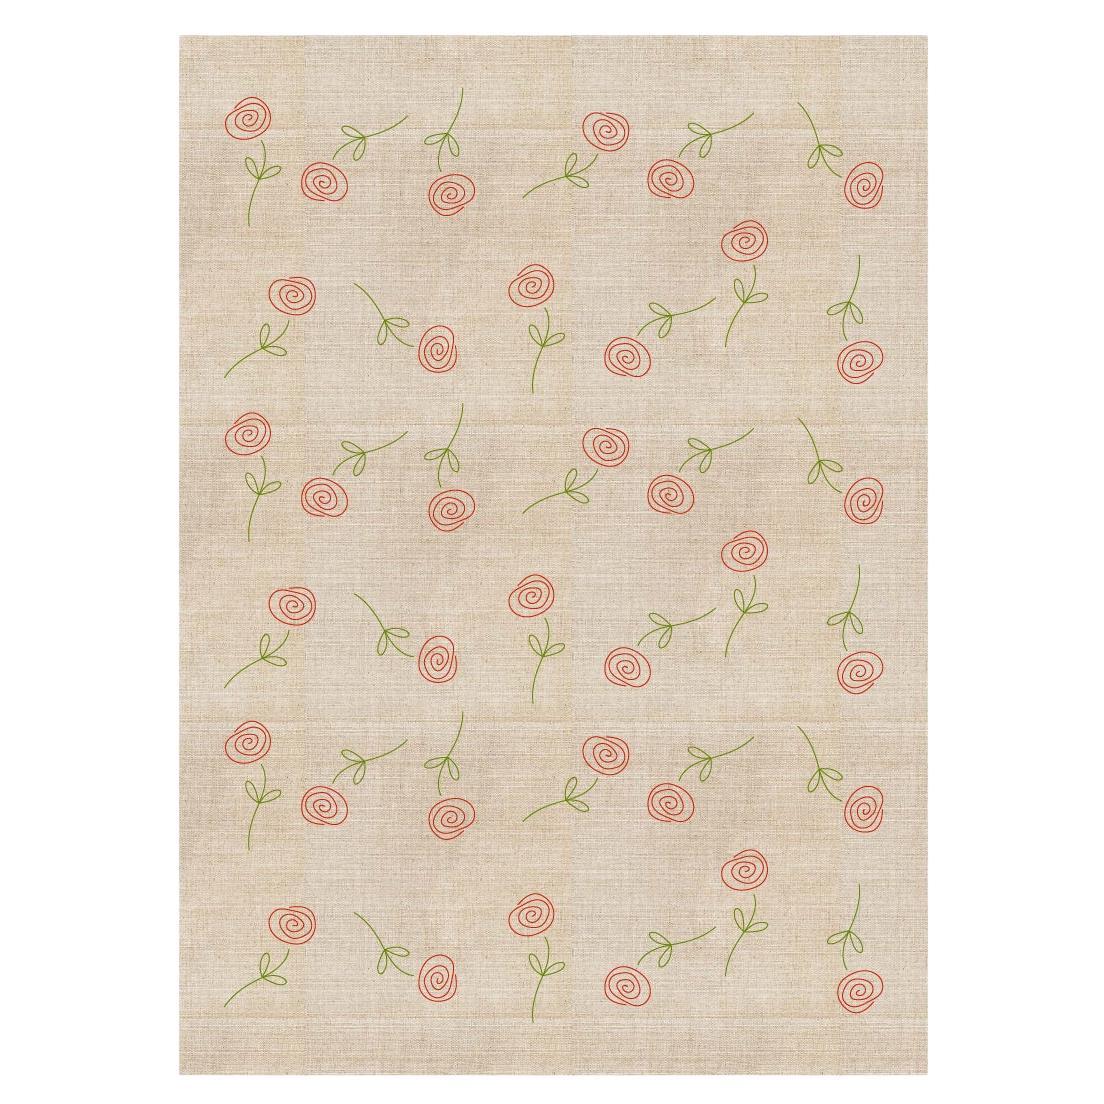 Roses Embroidered Carpet For Sale